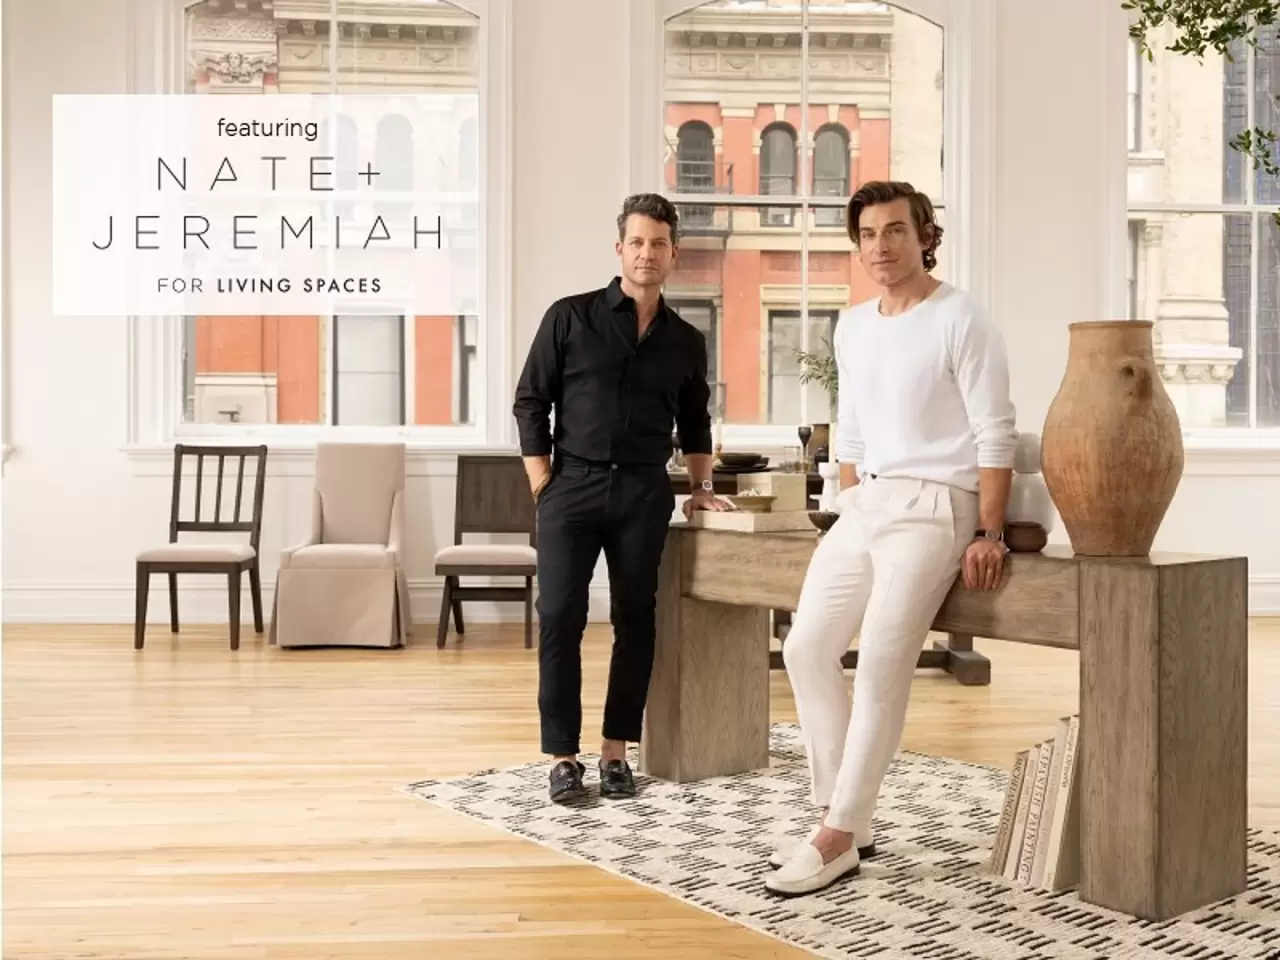 Celebrity Designers Nate Berkus and Jeremiah Brent Launch Their Latest Fall Line in Collaboration with Furnishings Retailer Living Spaces